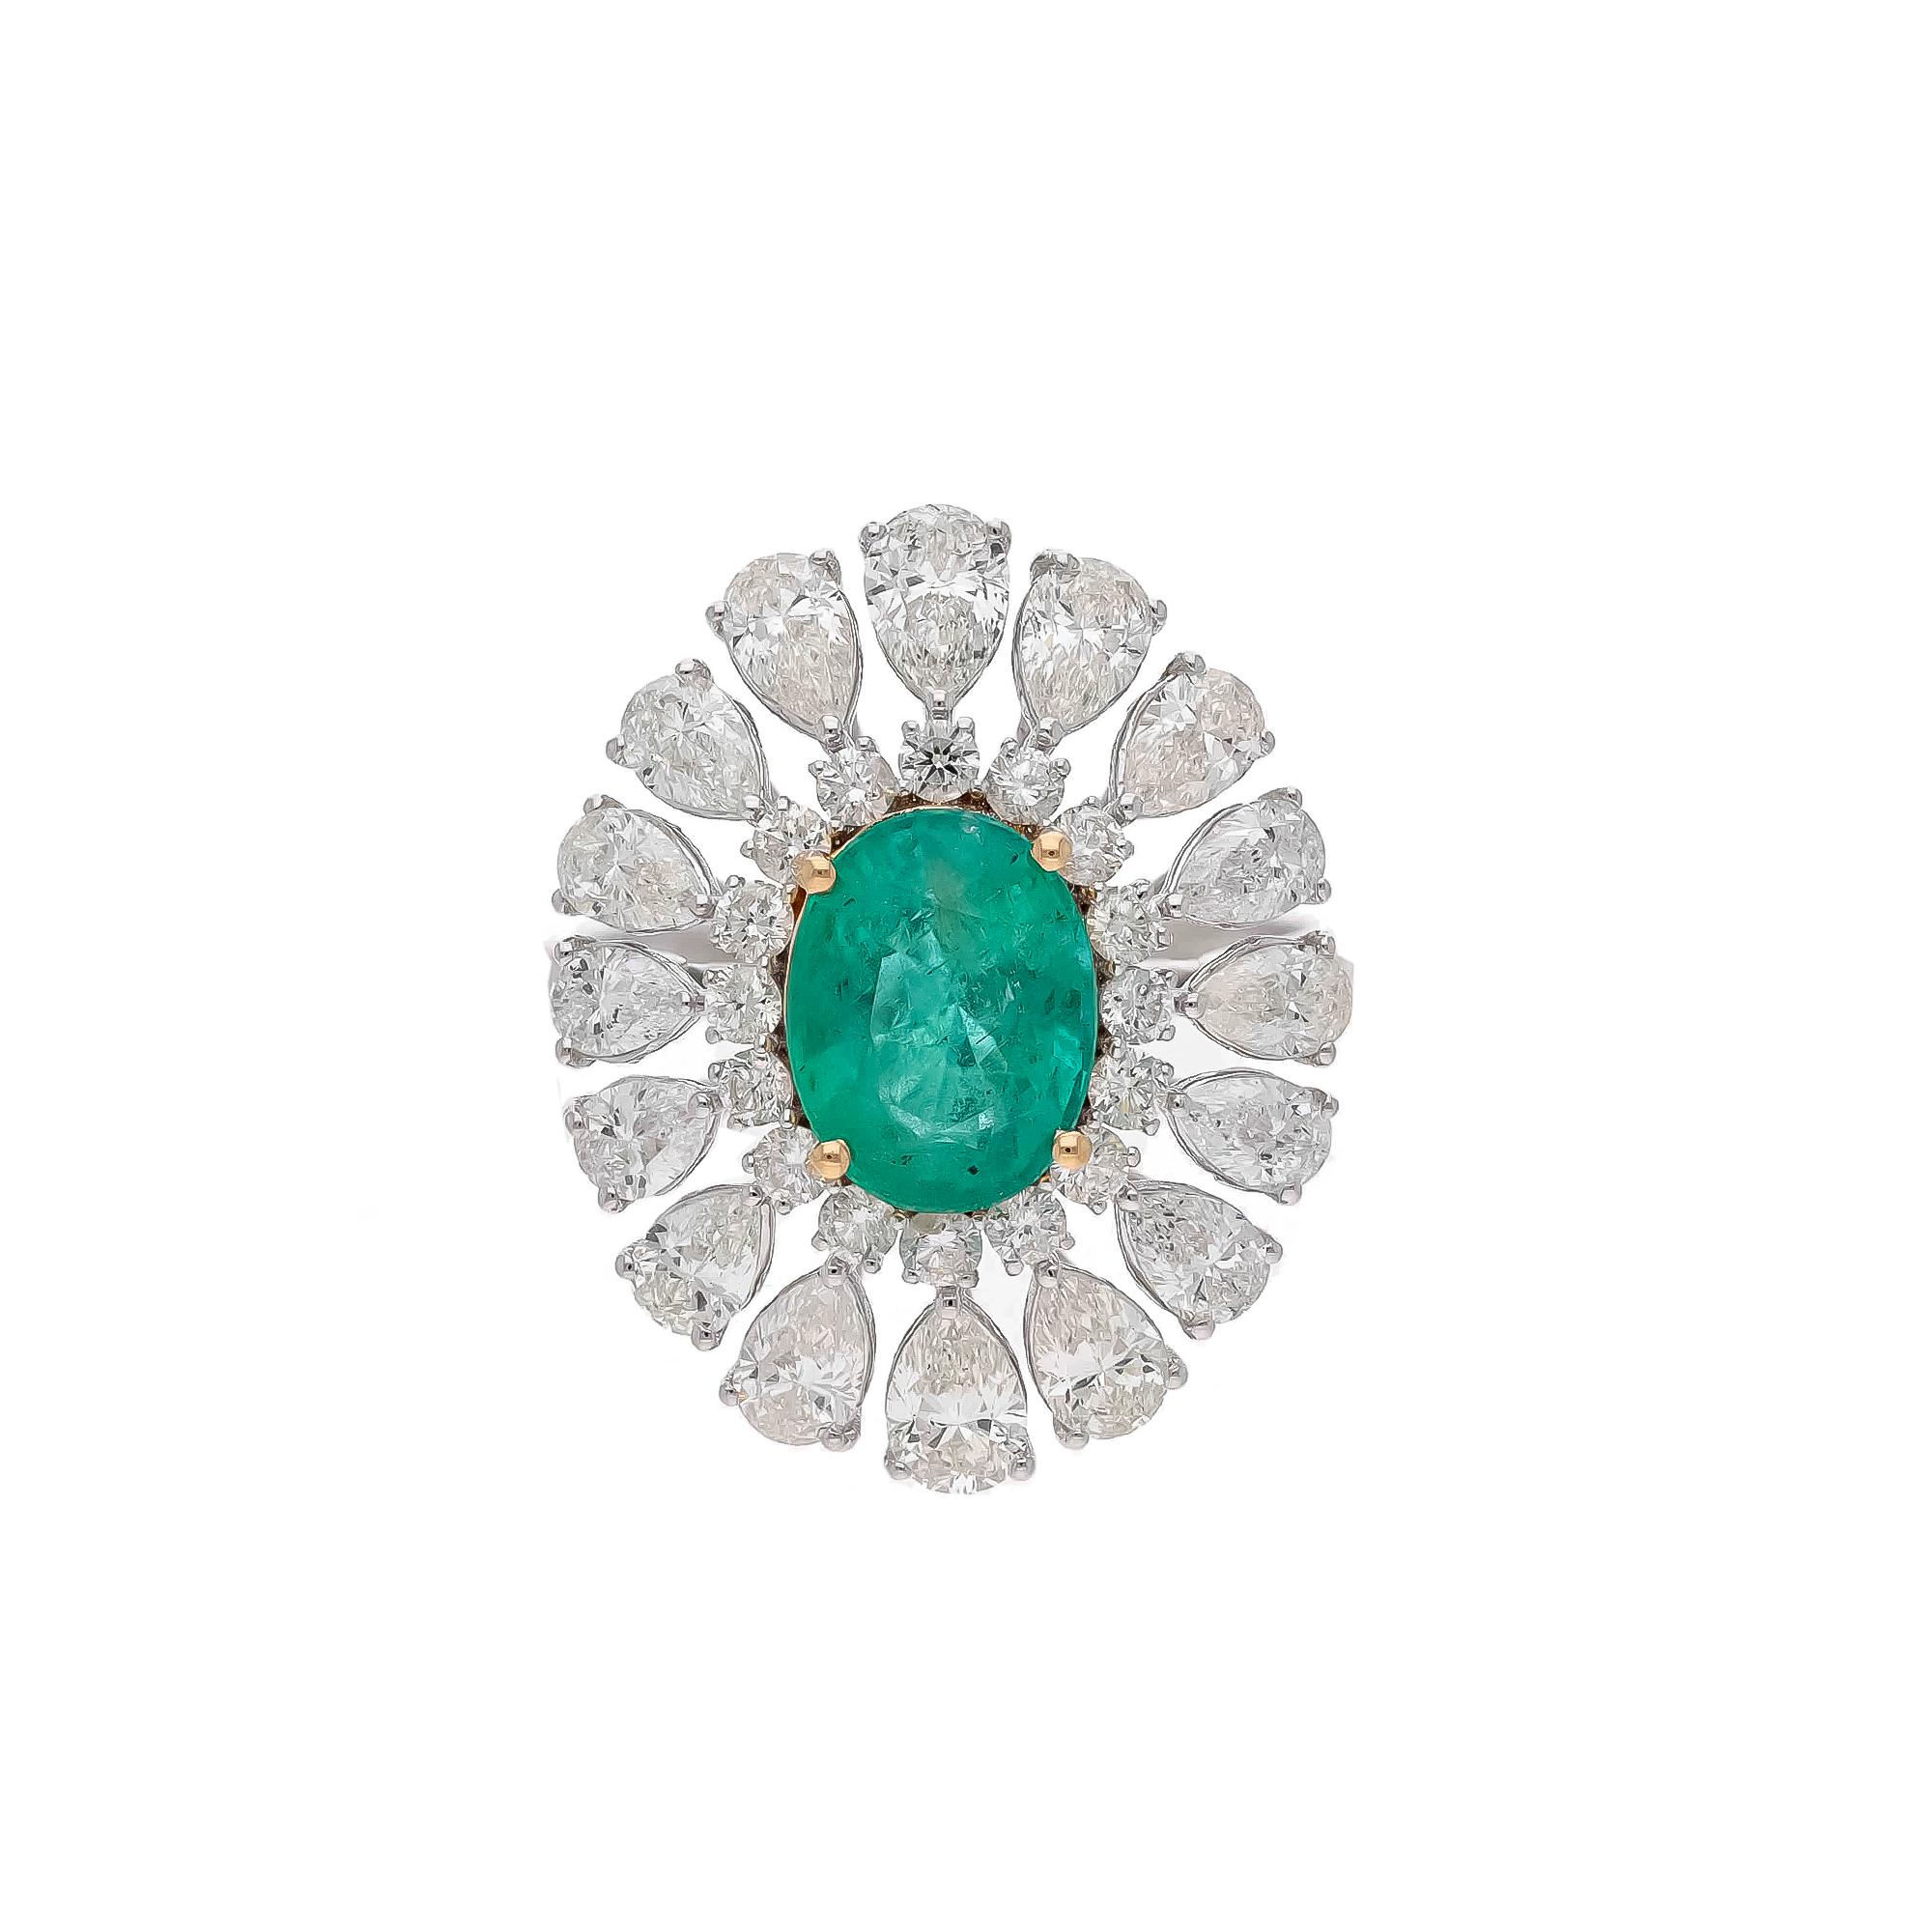 This is a natural Zambian Emerald ring with diamonds and 18k gold. The emeralds are very high quality and very good quality diamonds the clarity is vsi and G colour


Emeralds : 1.84 carats
diamonds : 2.48 carats
gold : 4.646 gms

This is a Brand